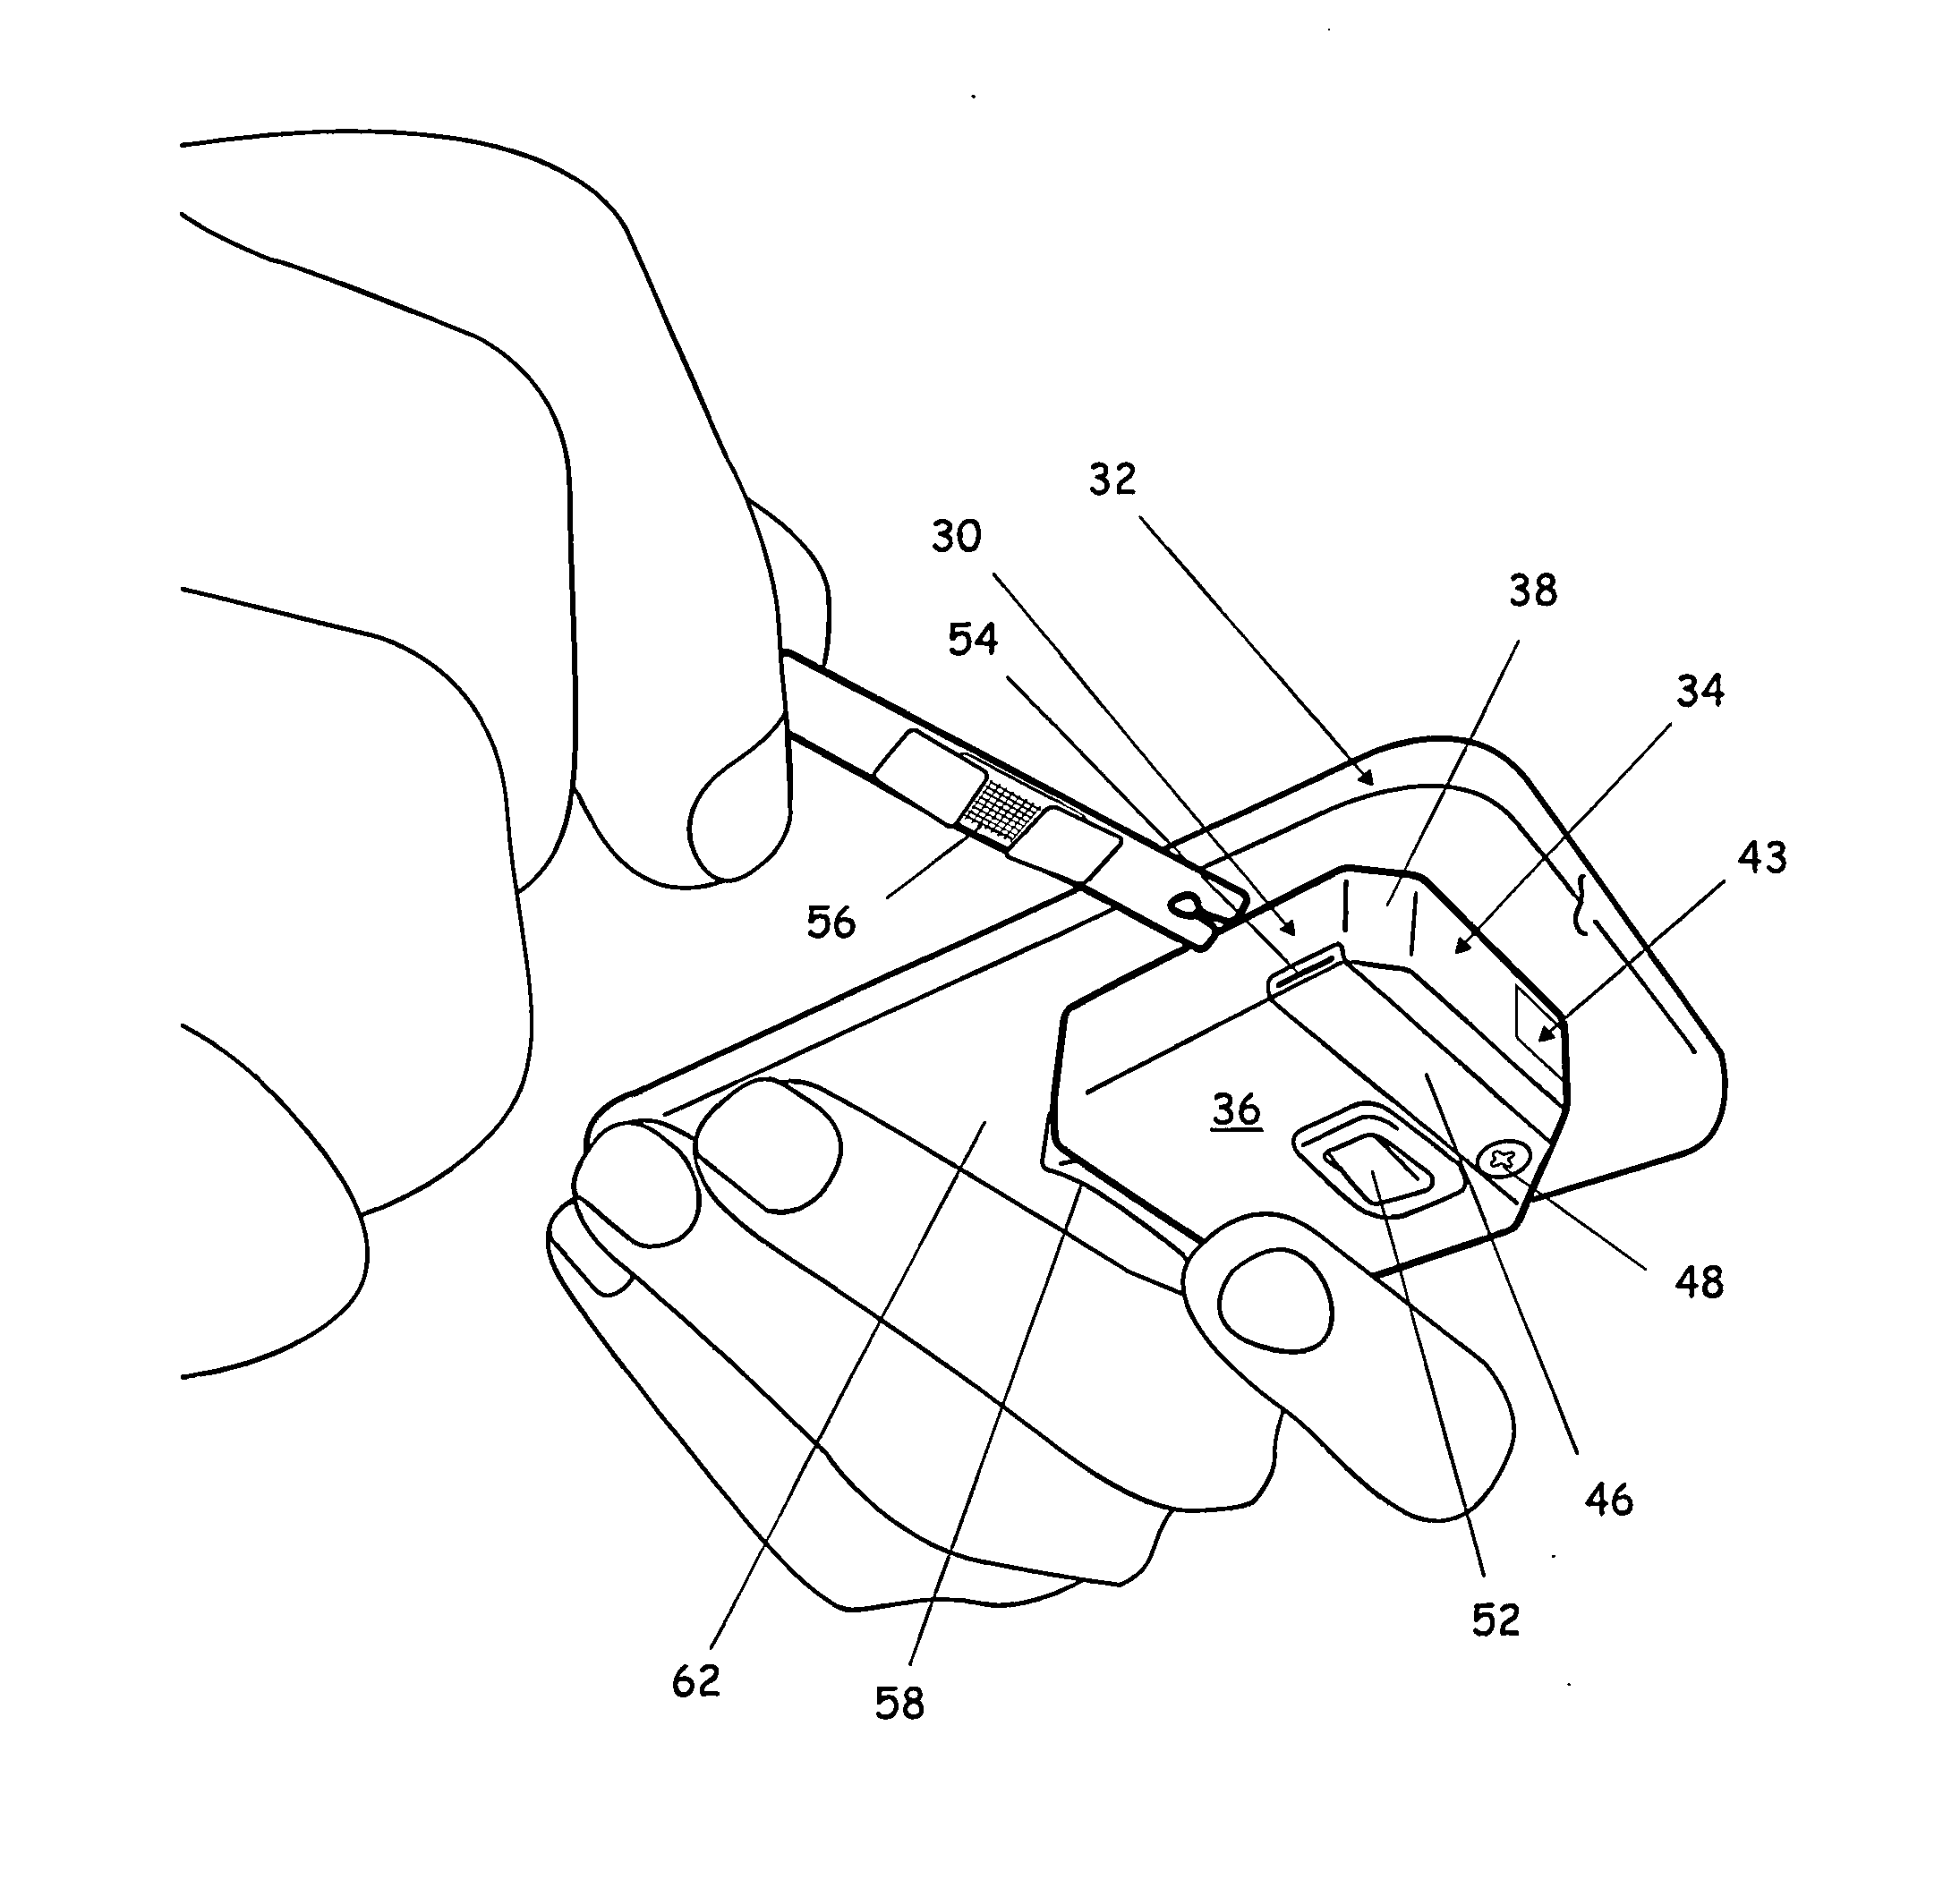 Portable medical diagnostic systems and methods using a mobile device